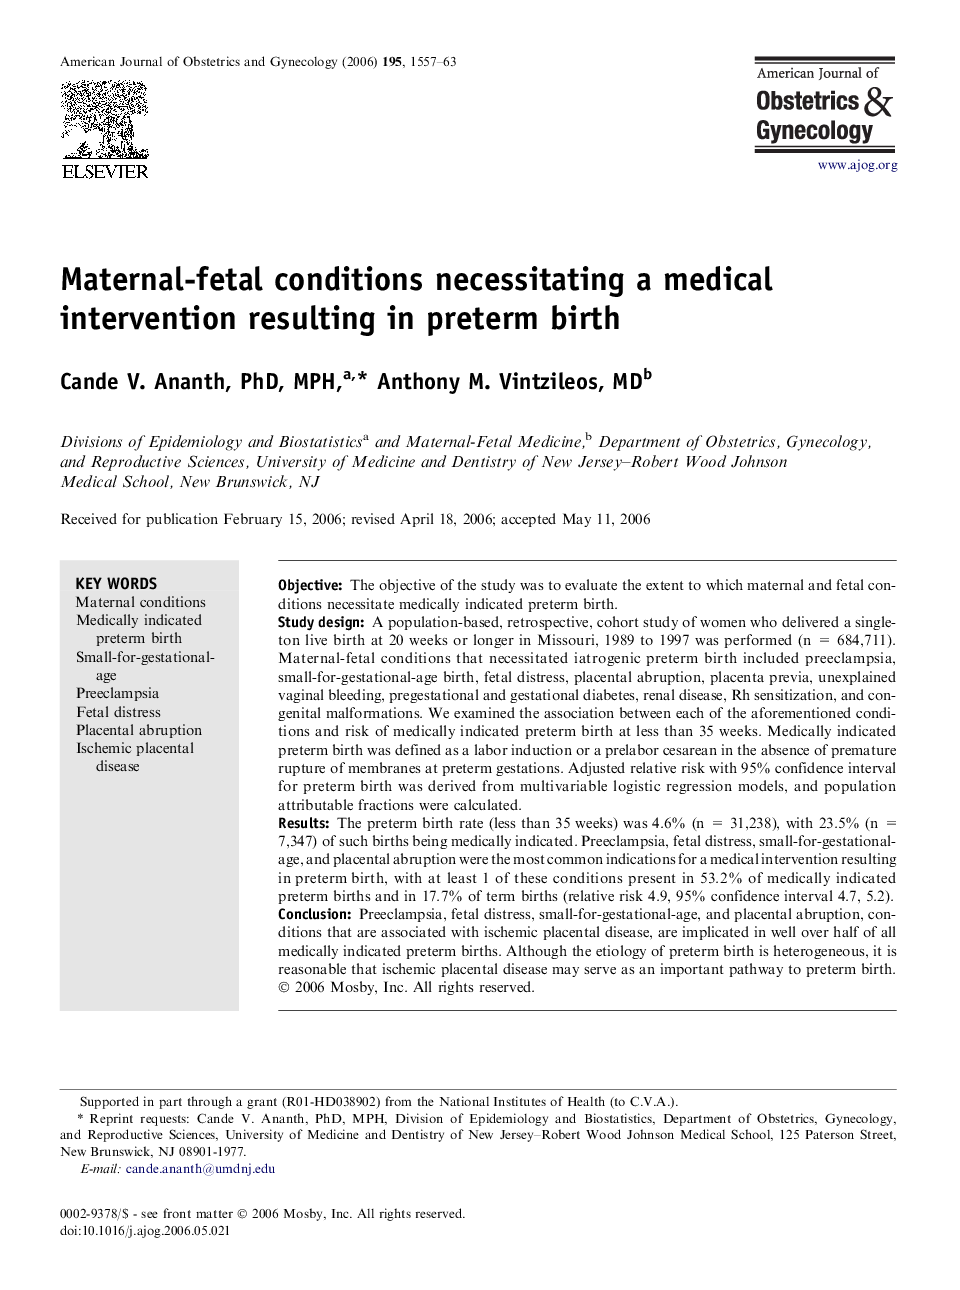 Maternal-fetal conditions necessitating a medical intervention resulting in preterm birth 